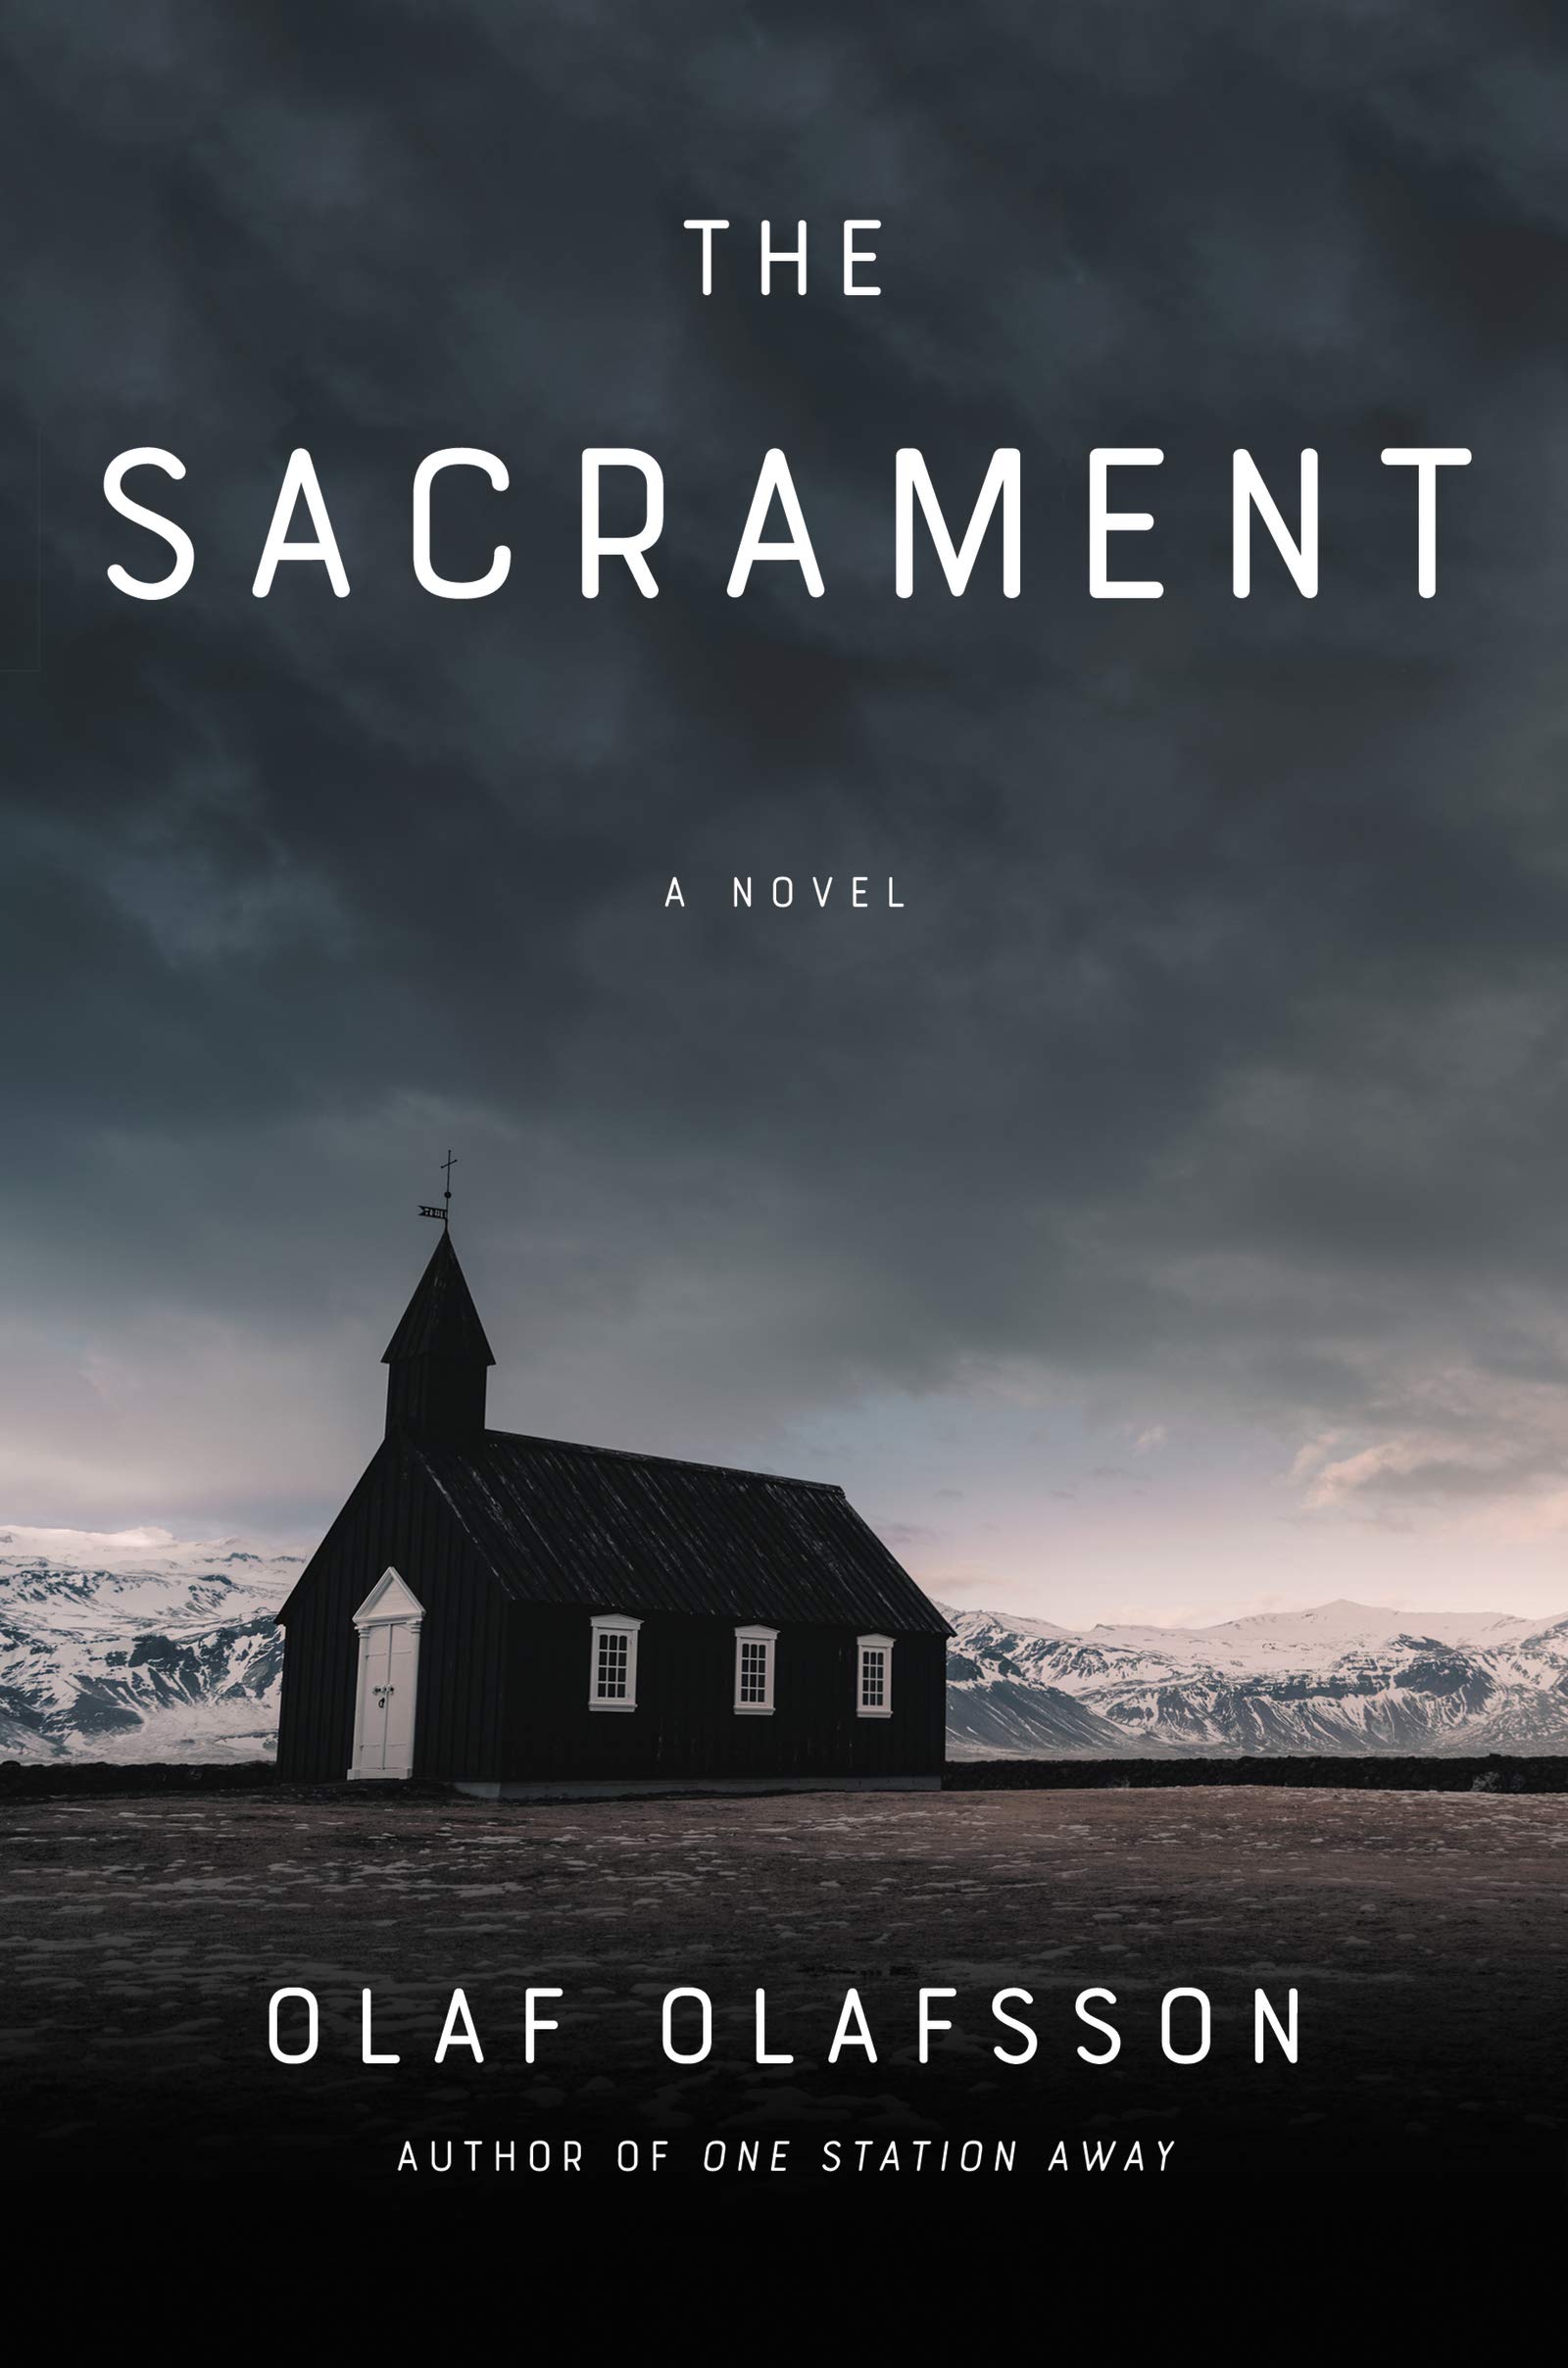 Image for "The Sacrament"